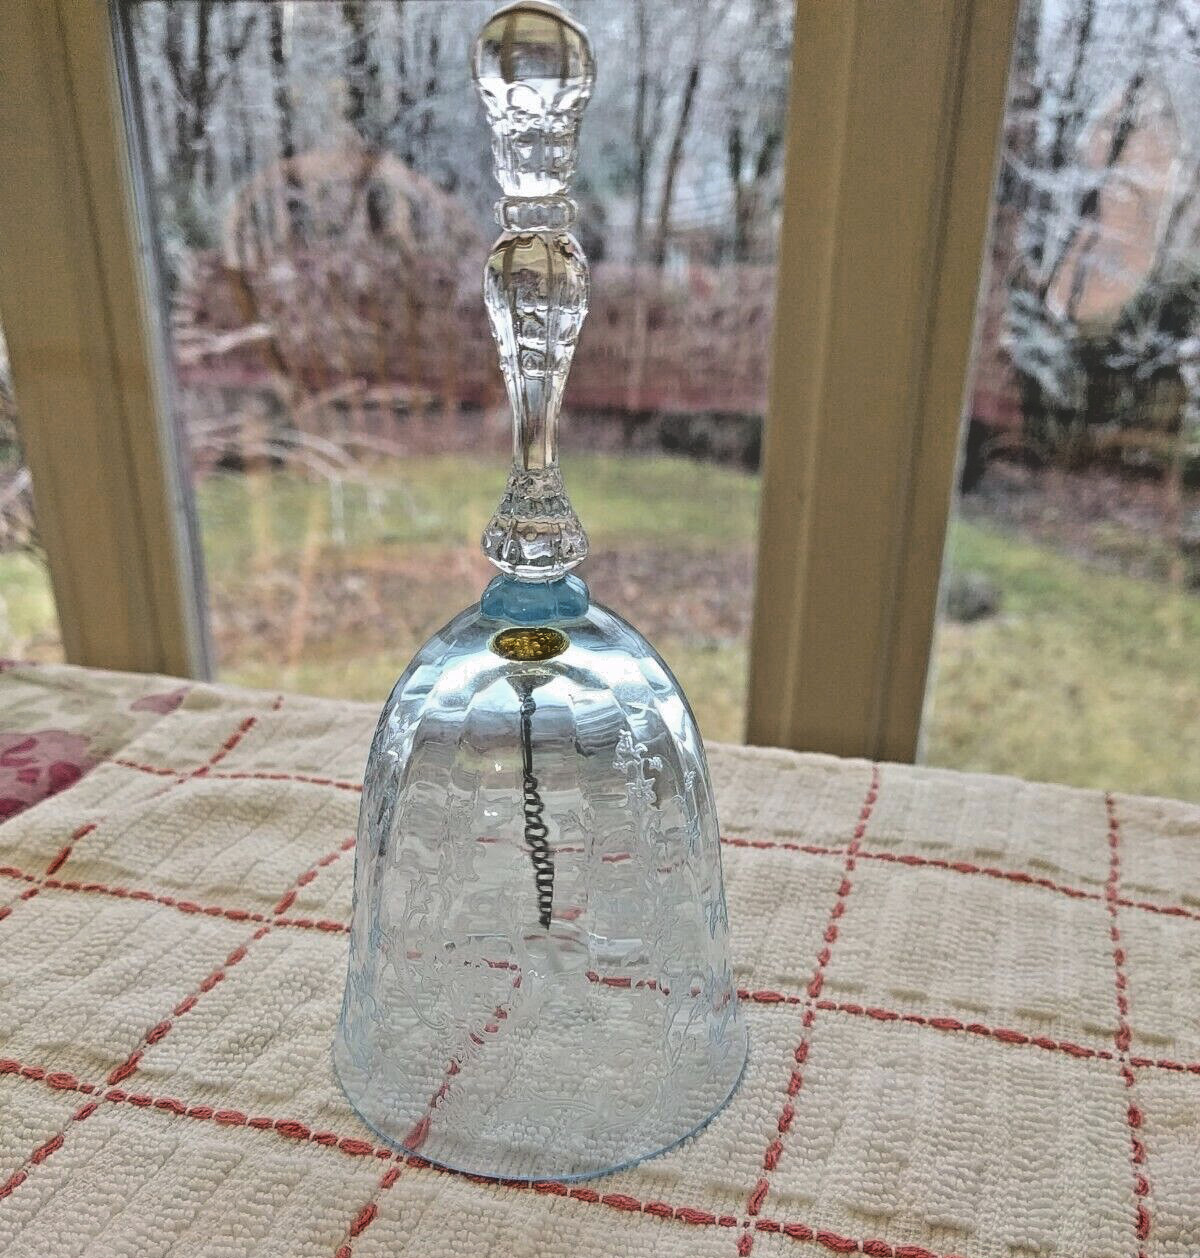 Vintage Etched Glass Bell, Lovely Light Blue Color with floral pattern